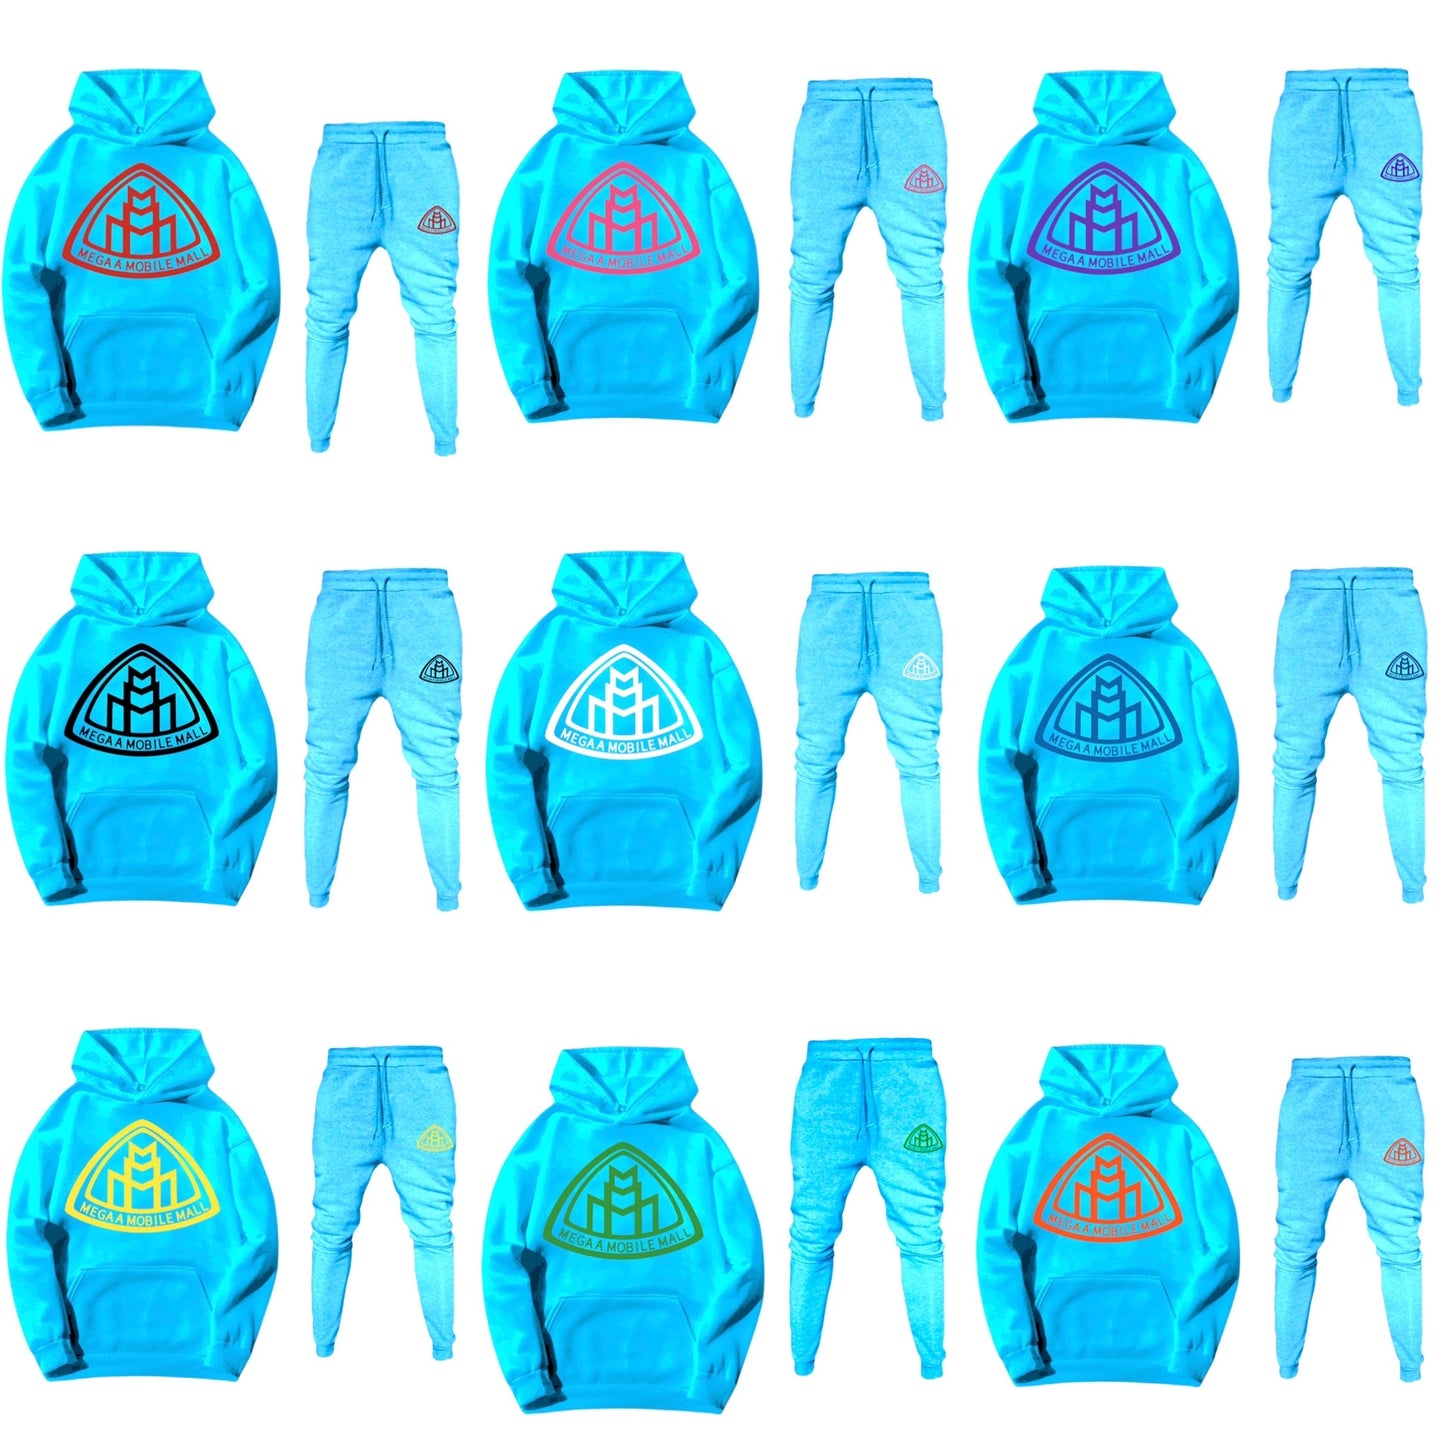 sky blue MEGAAMOBILEMALL LOGO Heavy Blend Fleece Hooded SweatSuits available in 9 different logo colors